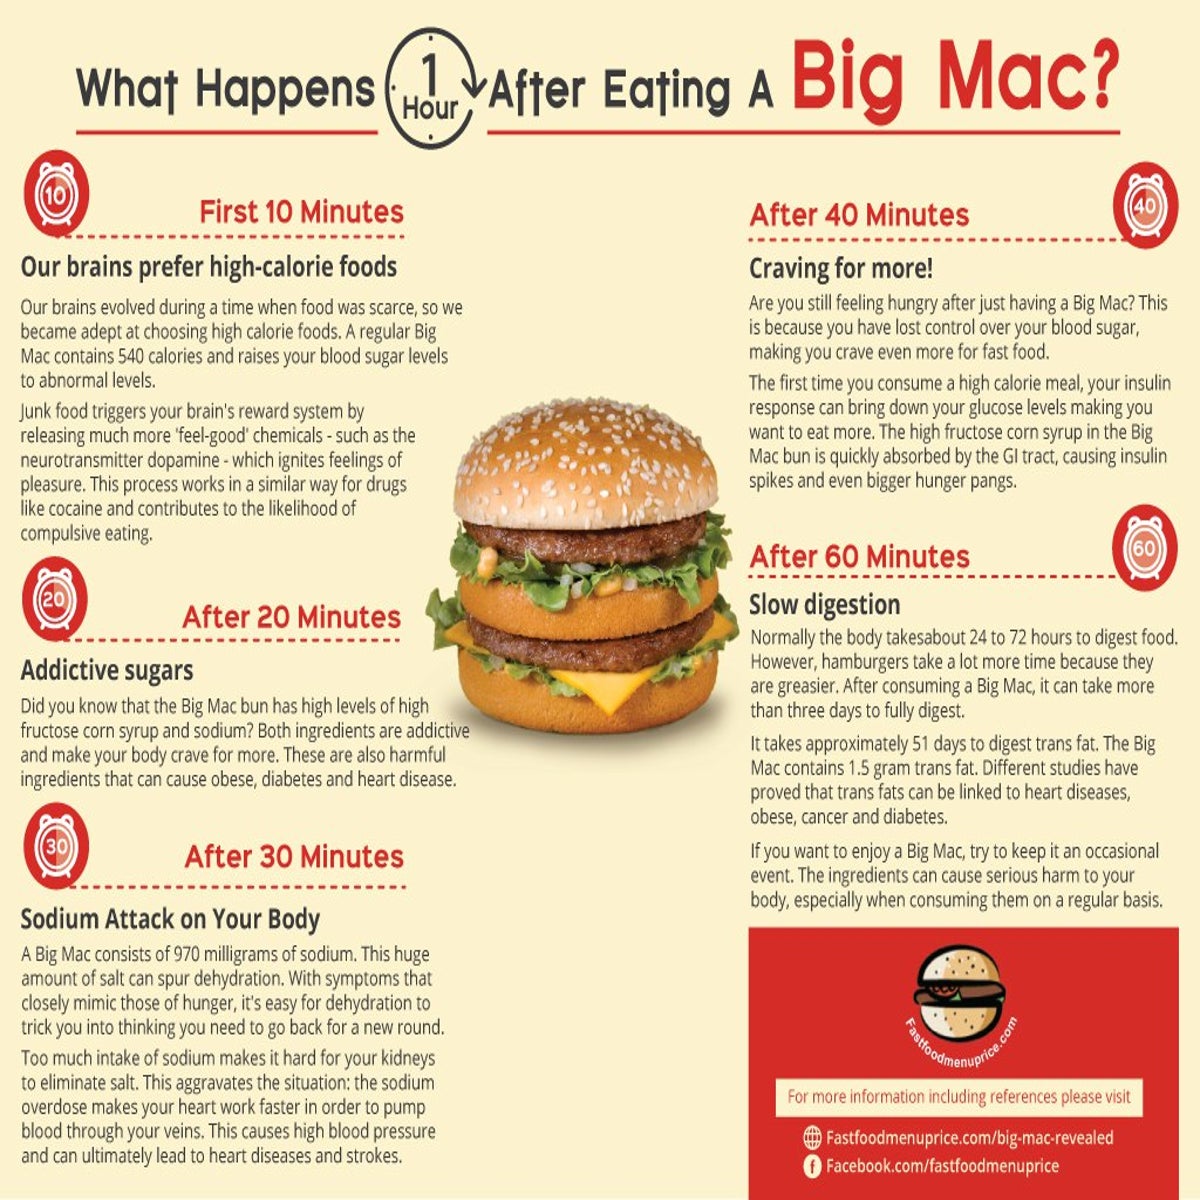 How a Big Mac affects your body in 1 hour